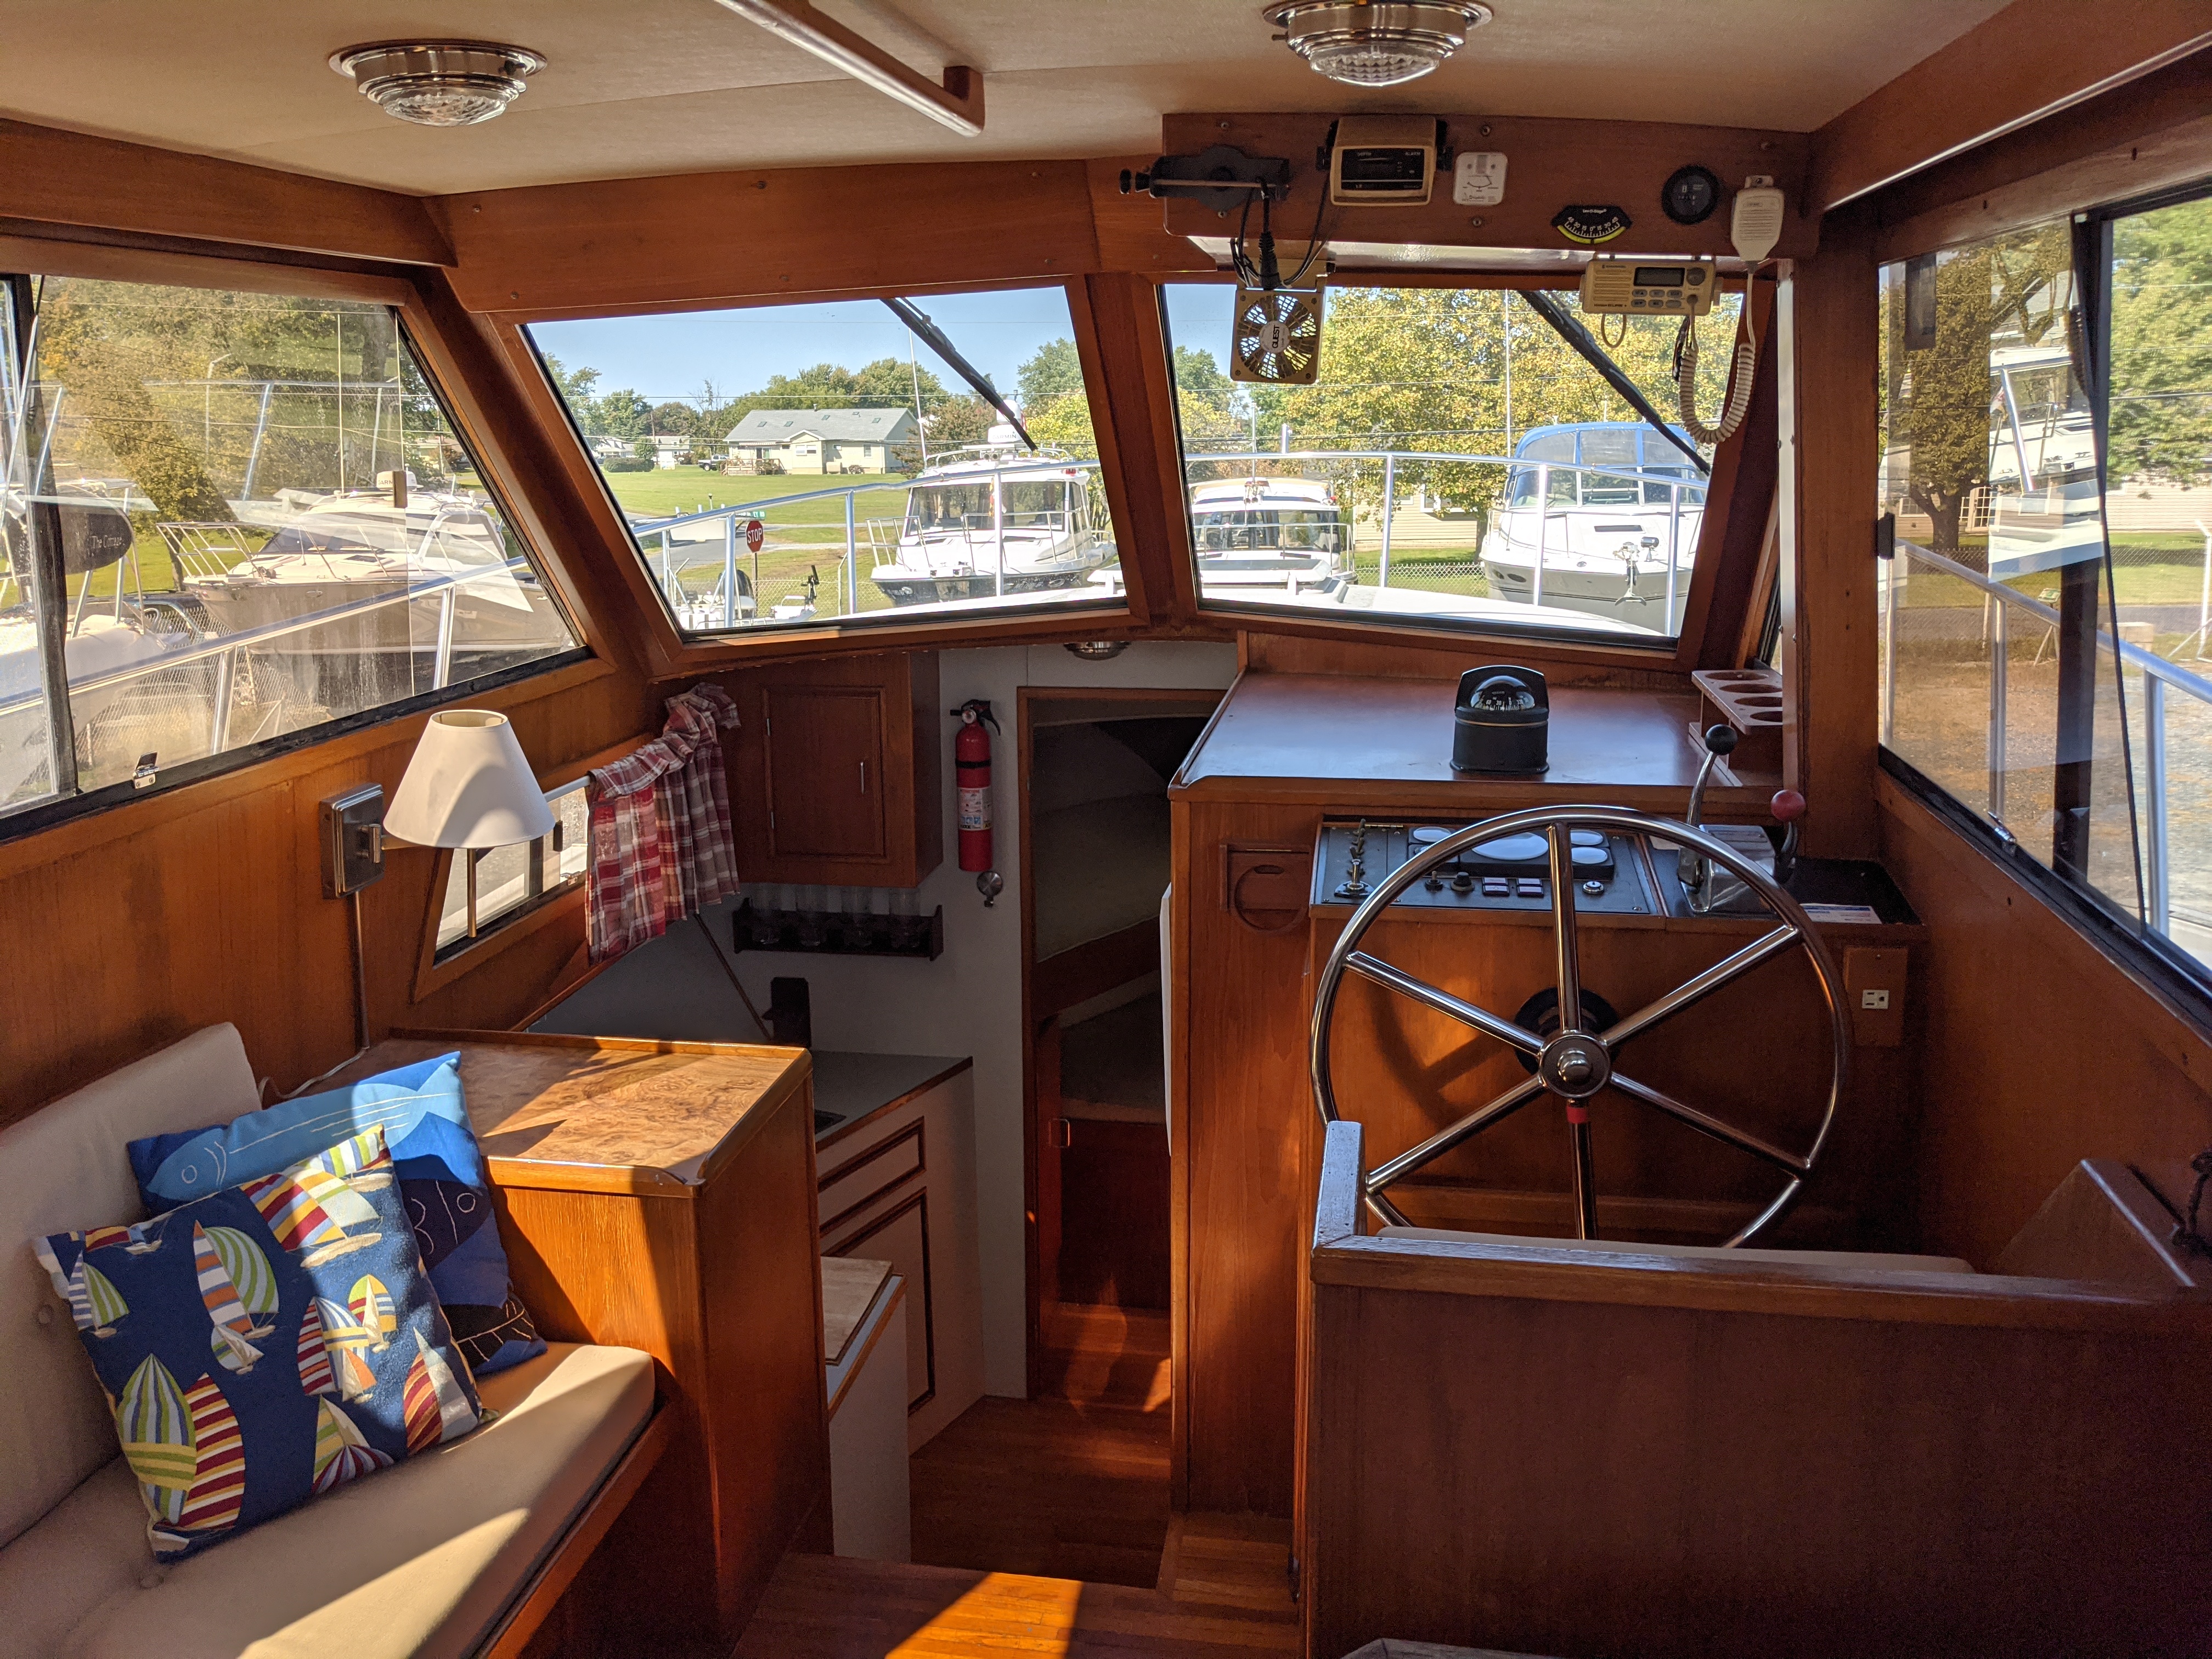 How to Clean Tight Spaces on a Boat - The Boat Galley